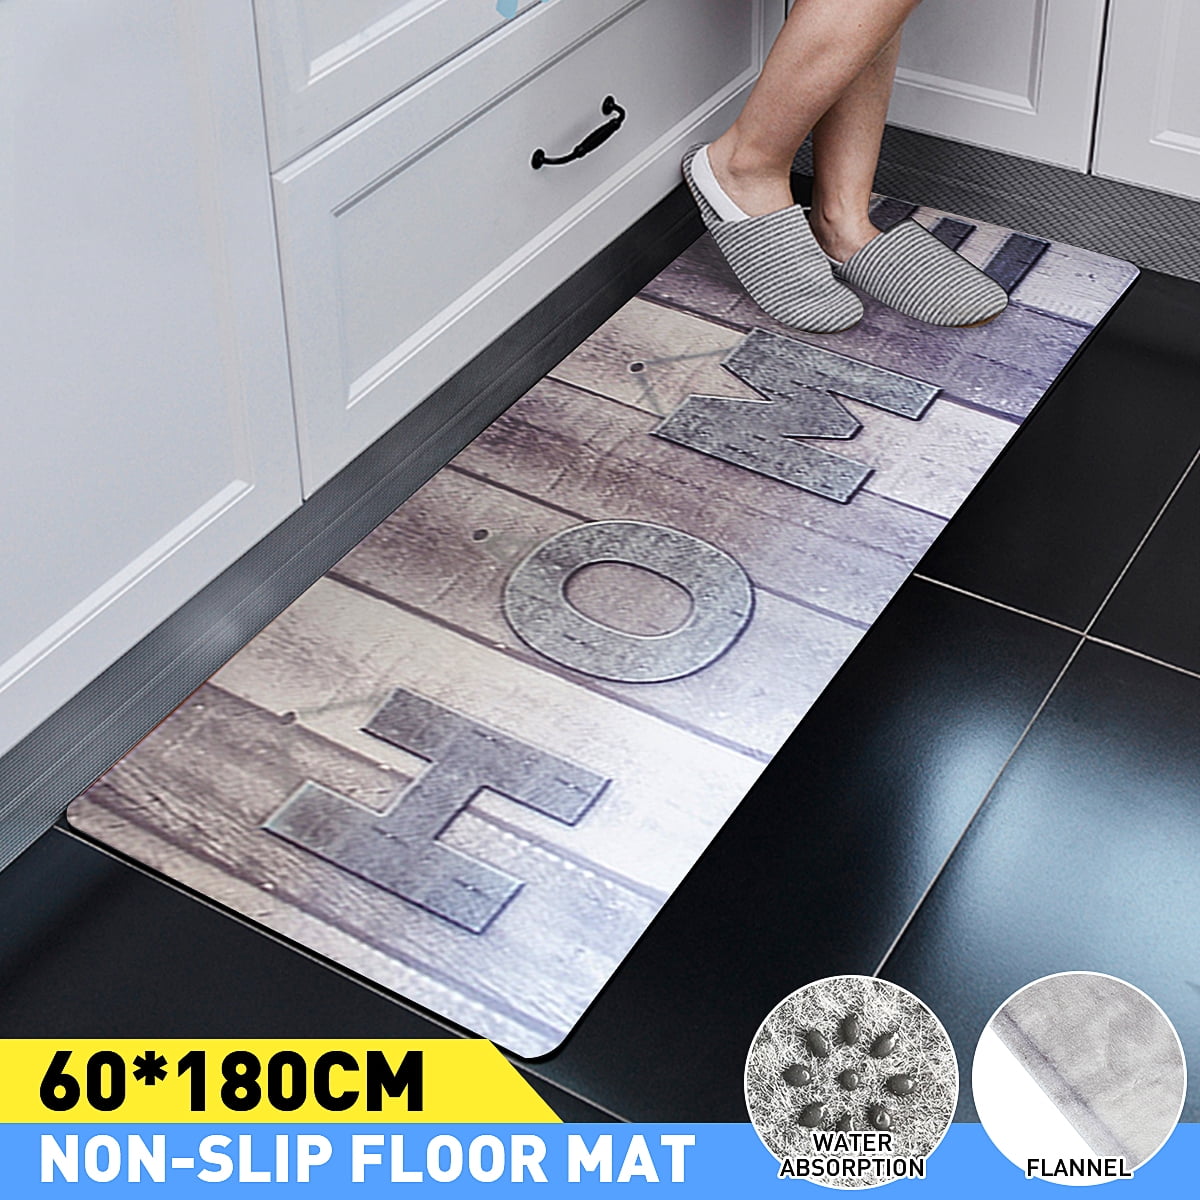 Soft Foam Area Rugs Bird's Eye Baseball Field Washable Non Slip Kitchen Rugs Bath Rug for Home Decor Indoor/Outdoor 36x24in